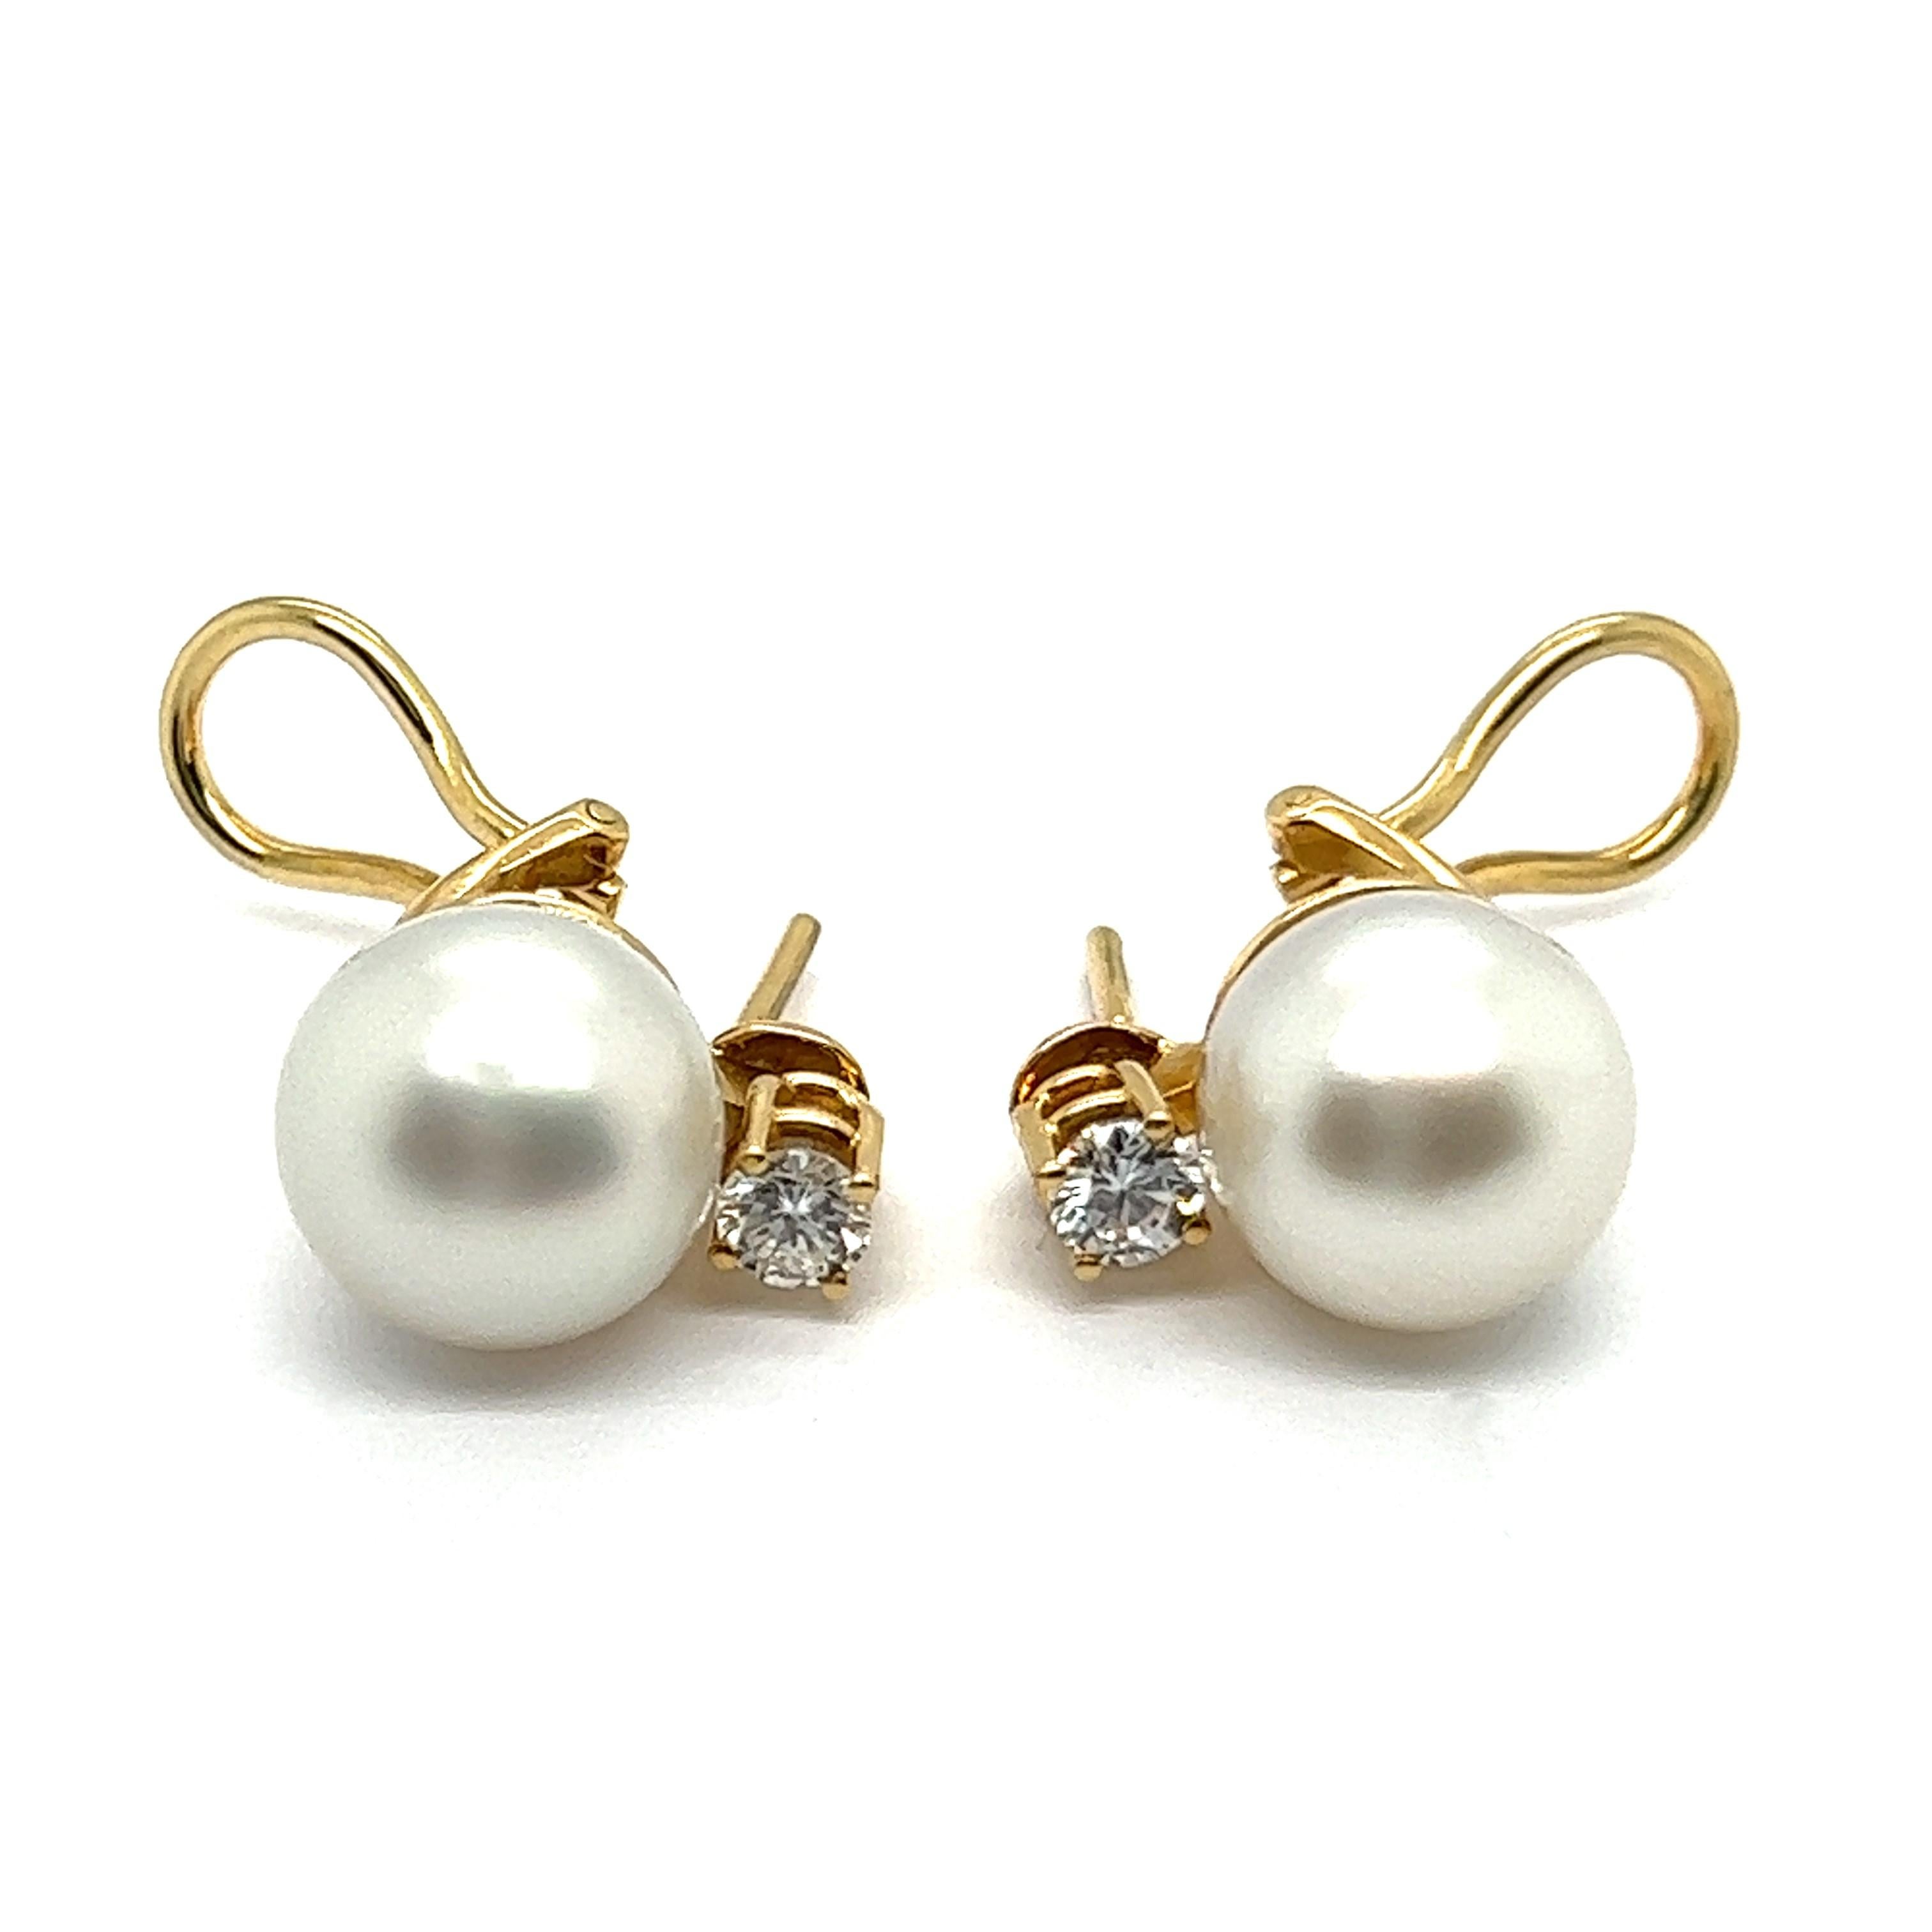 Women's or Men's Ear clips with South Sea Pearls & Diamonds in 18 Karat Yellow Gold